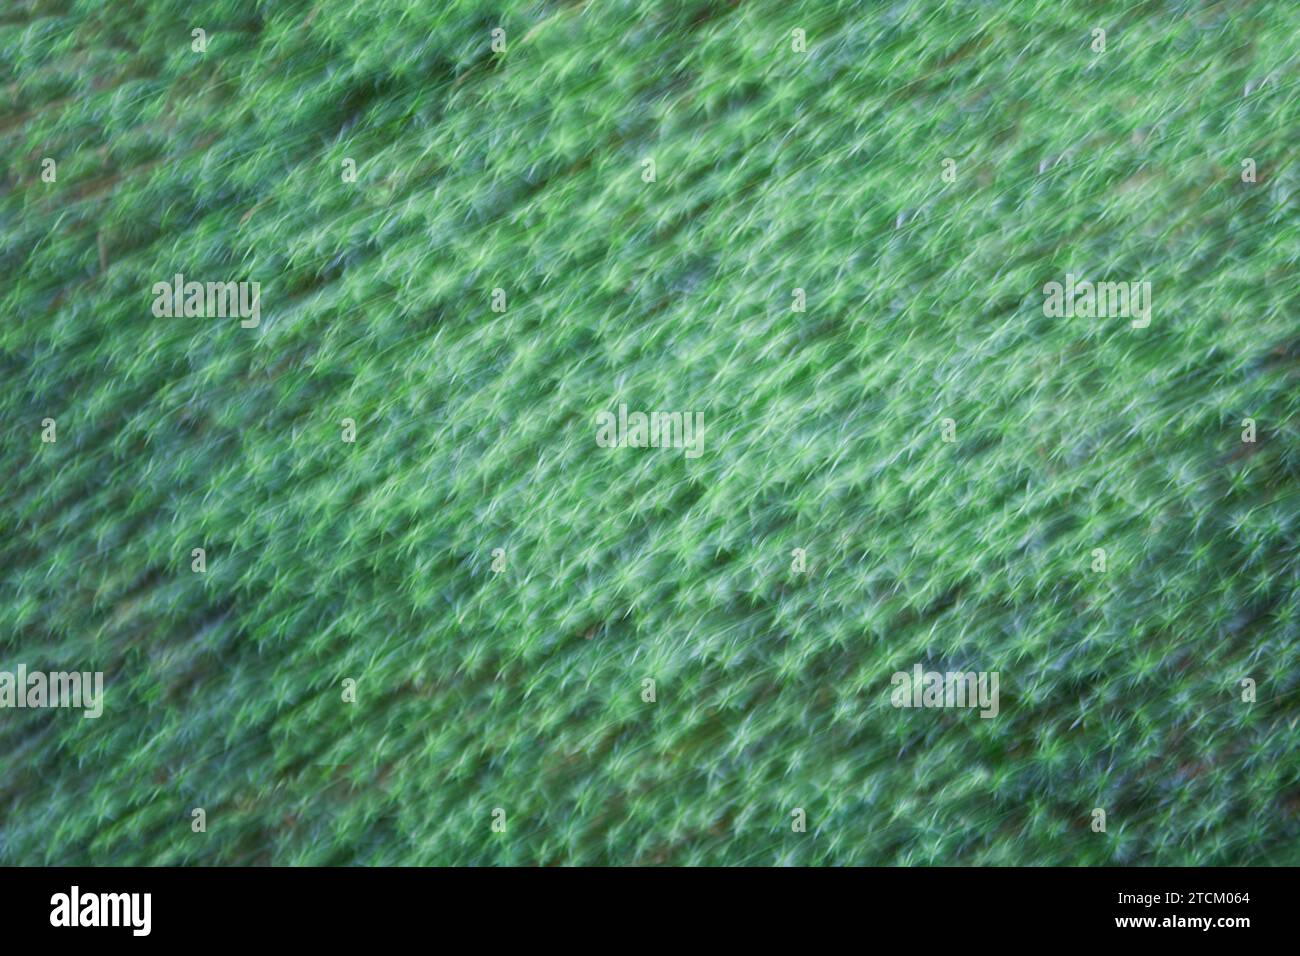 Moss structures, abstract background, wiping effect, bulb exposure Stock Photo